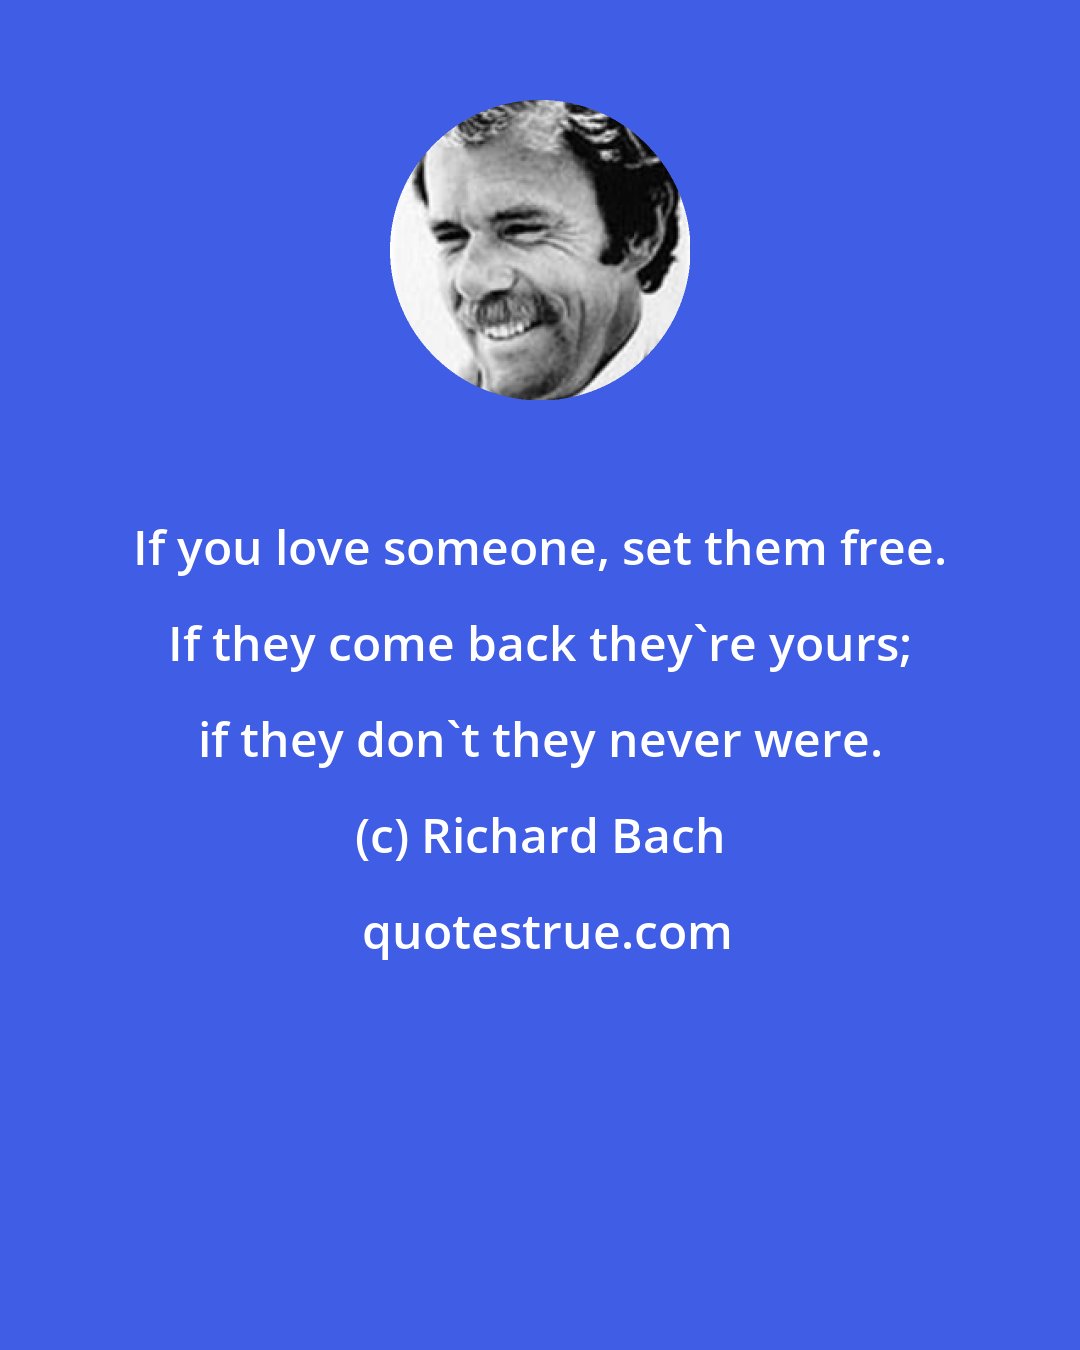 Richard Bach: If you love someone, set them free. If they come back they're yours; if they don't they never were.